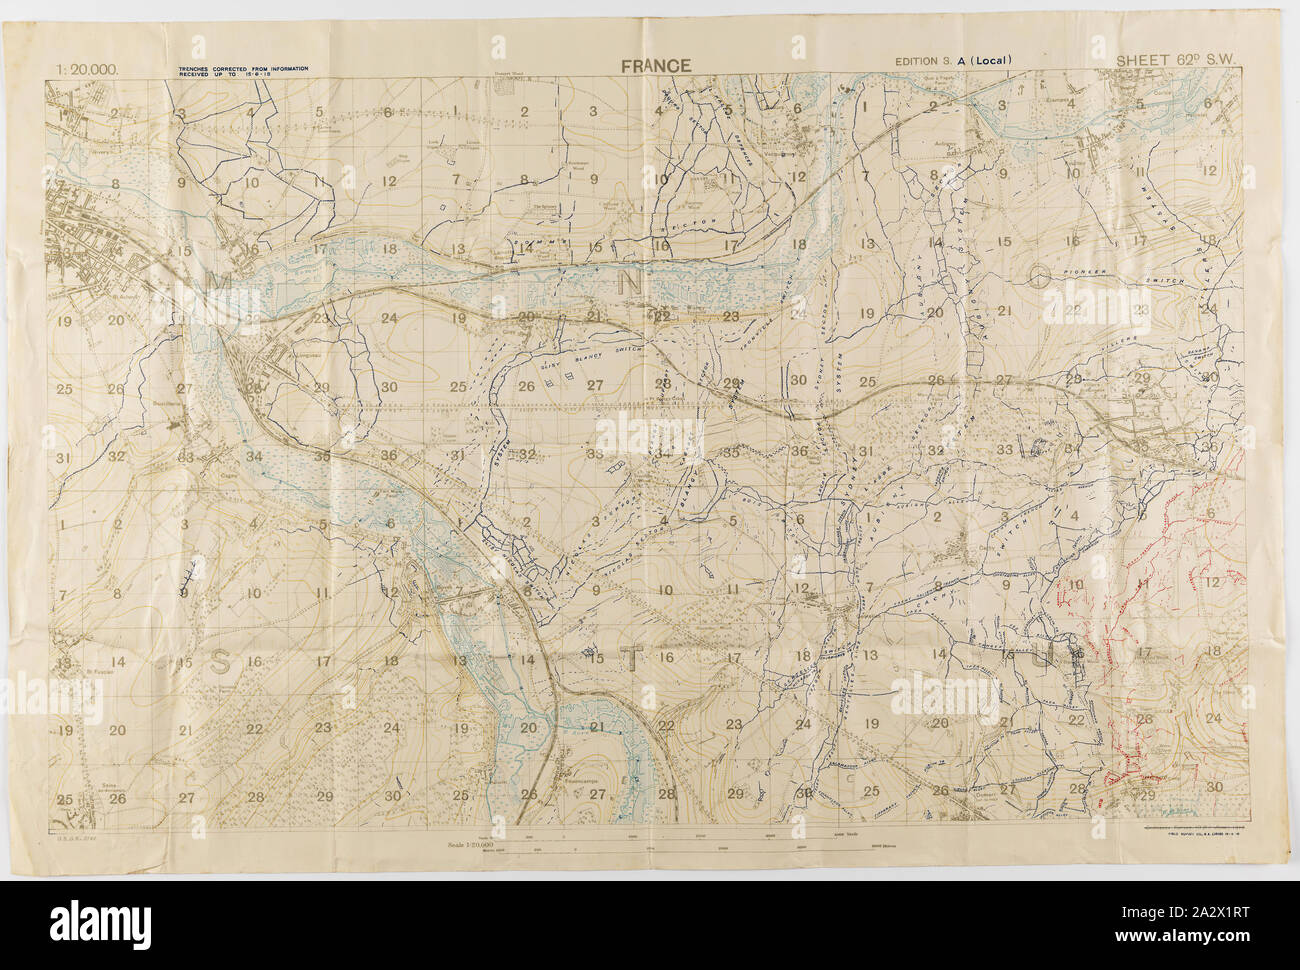 Map - Military, Trench, France, Sheet 62D SW, Scale 1:20,000, Edition 3A, World War I, 18 Jun 1918, One of two copies of a military trench map, France, sheet 62 D. S. W., edition 3.A., (local) scale 1:20,000. Trenches corrected from information received up to 15 June 1918. Field Survey Co., R. E. (3808), dated 18 June 1918. The map depicts the Somme River area to the east and south-east of Amiens, including Villers Bretonneux. Used by Capt. M. Lewis during World War I. Captain Morris Lewis Stock Photo